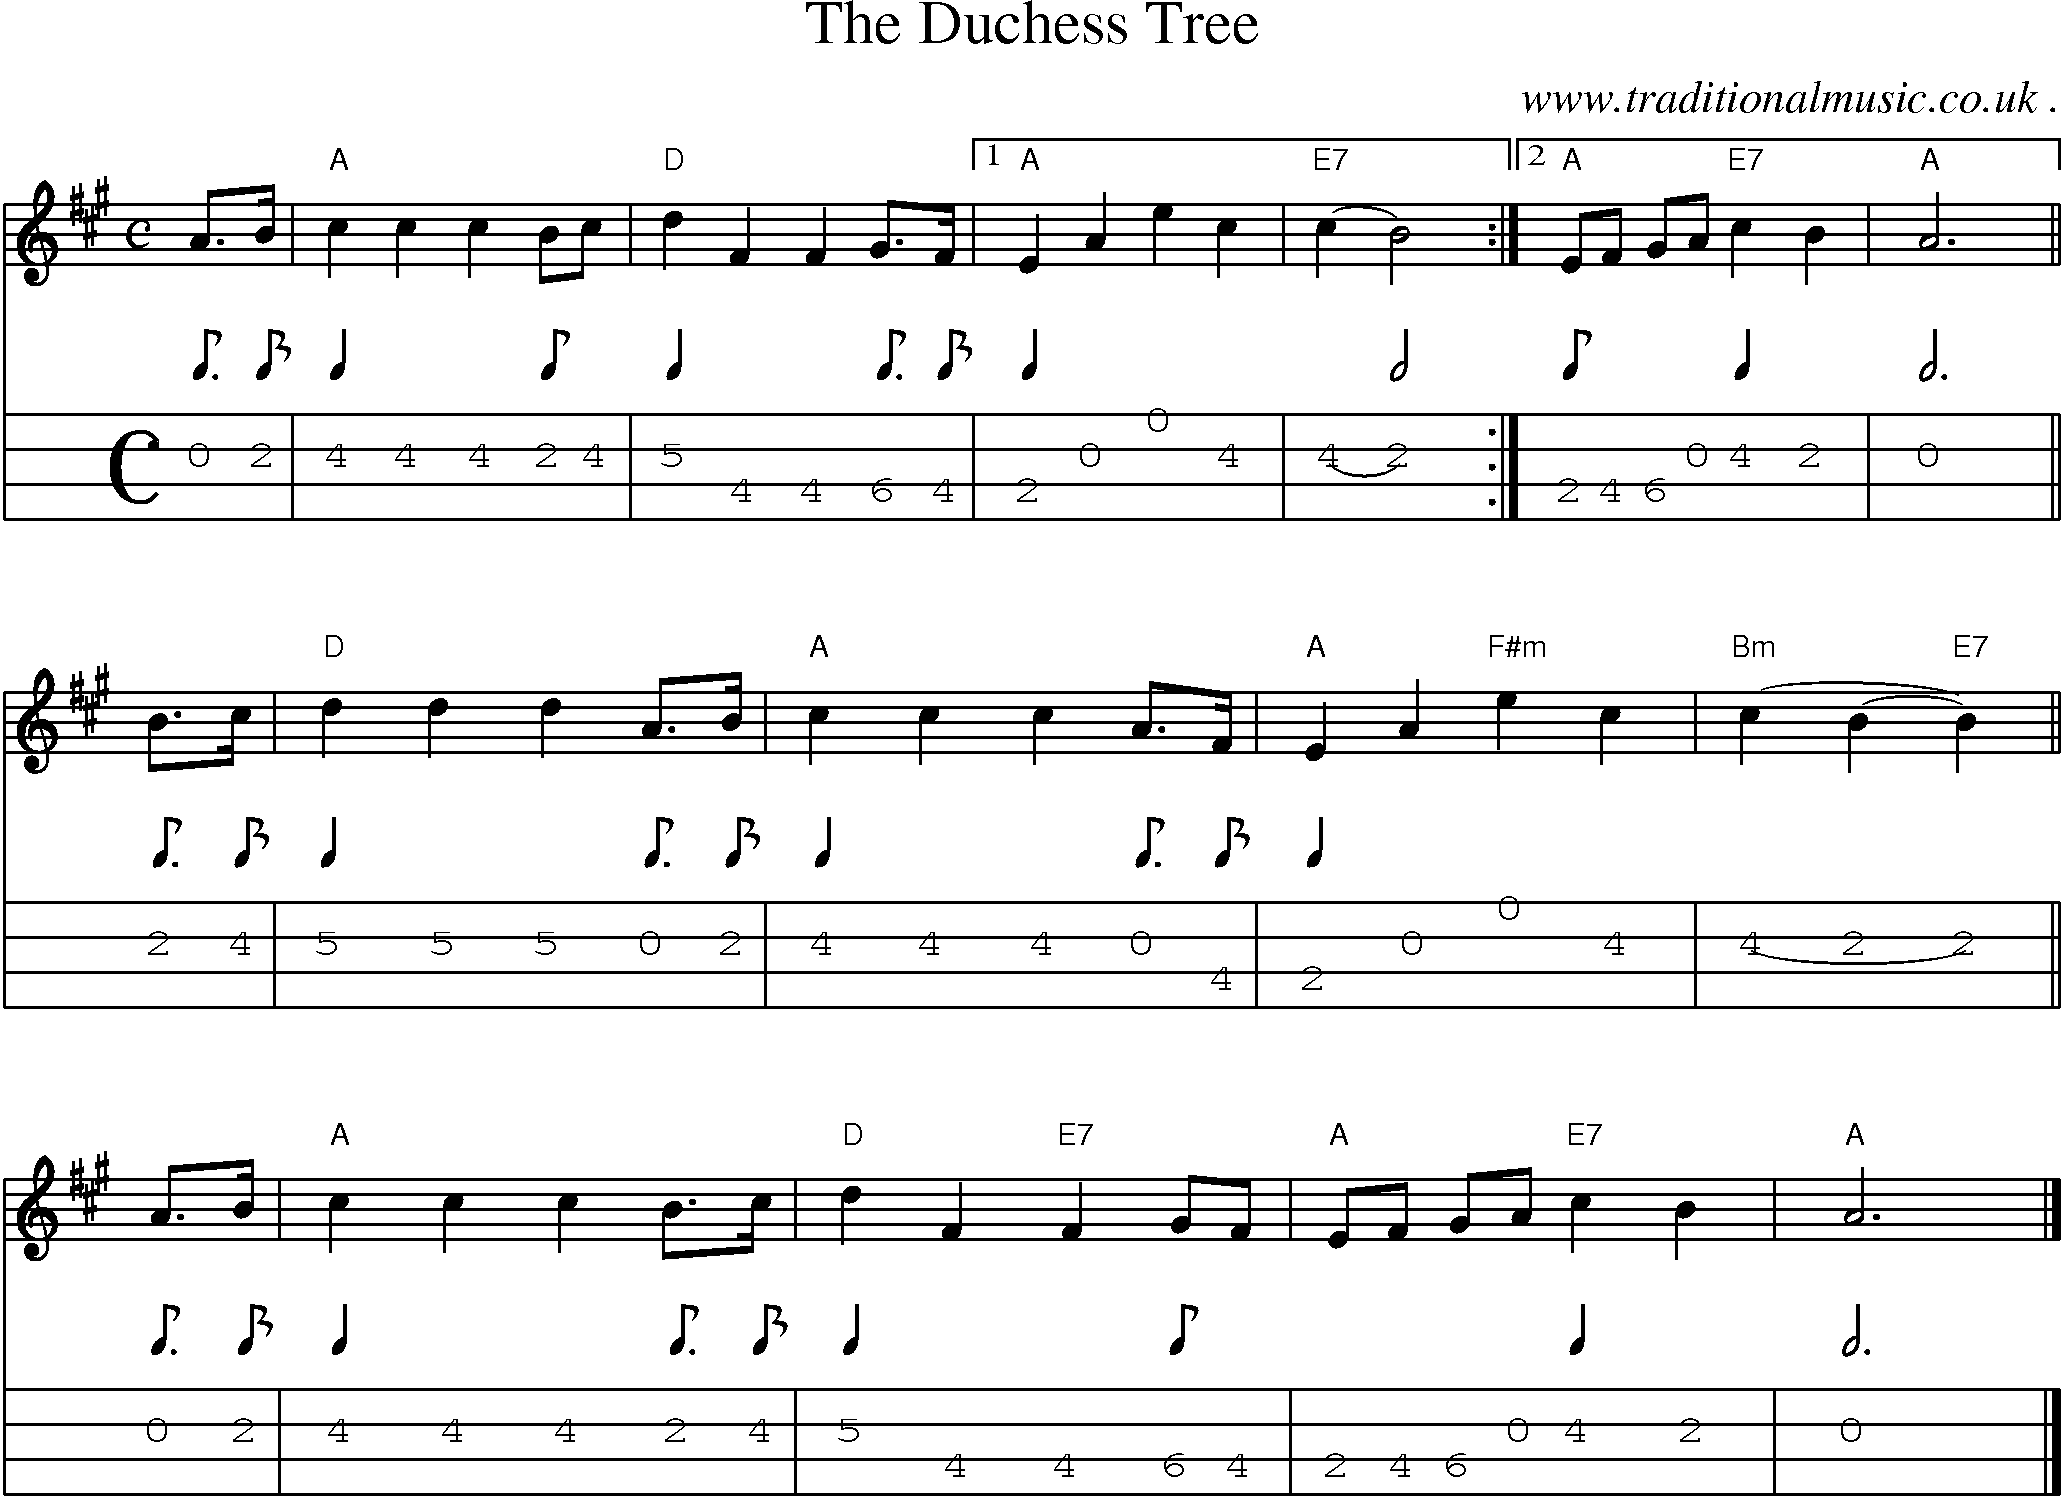 Sheet-music  score, Chords and Mandolin Tabs for The Duchess Tree